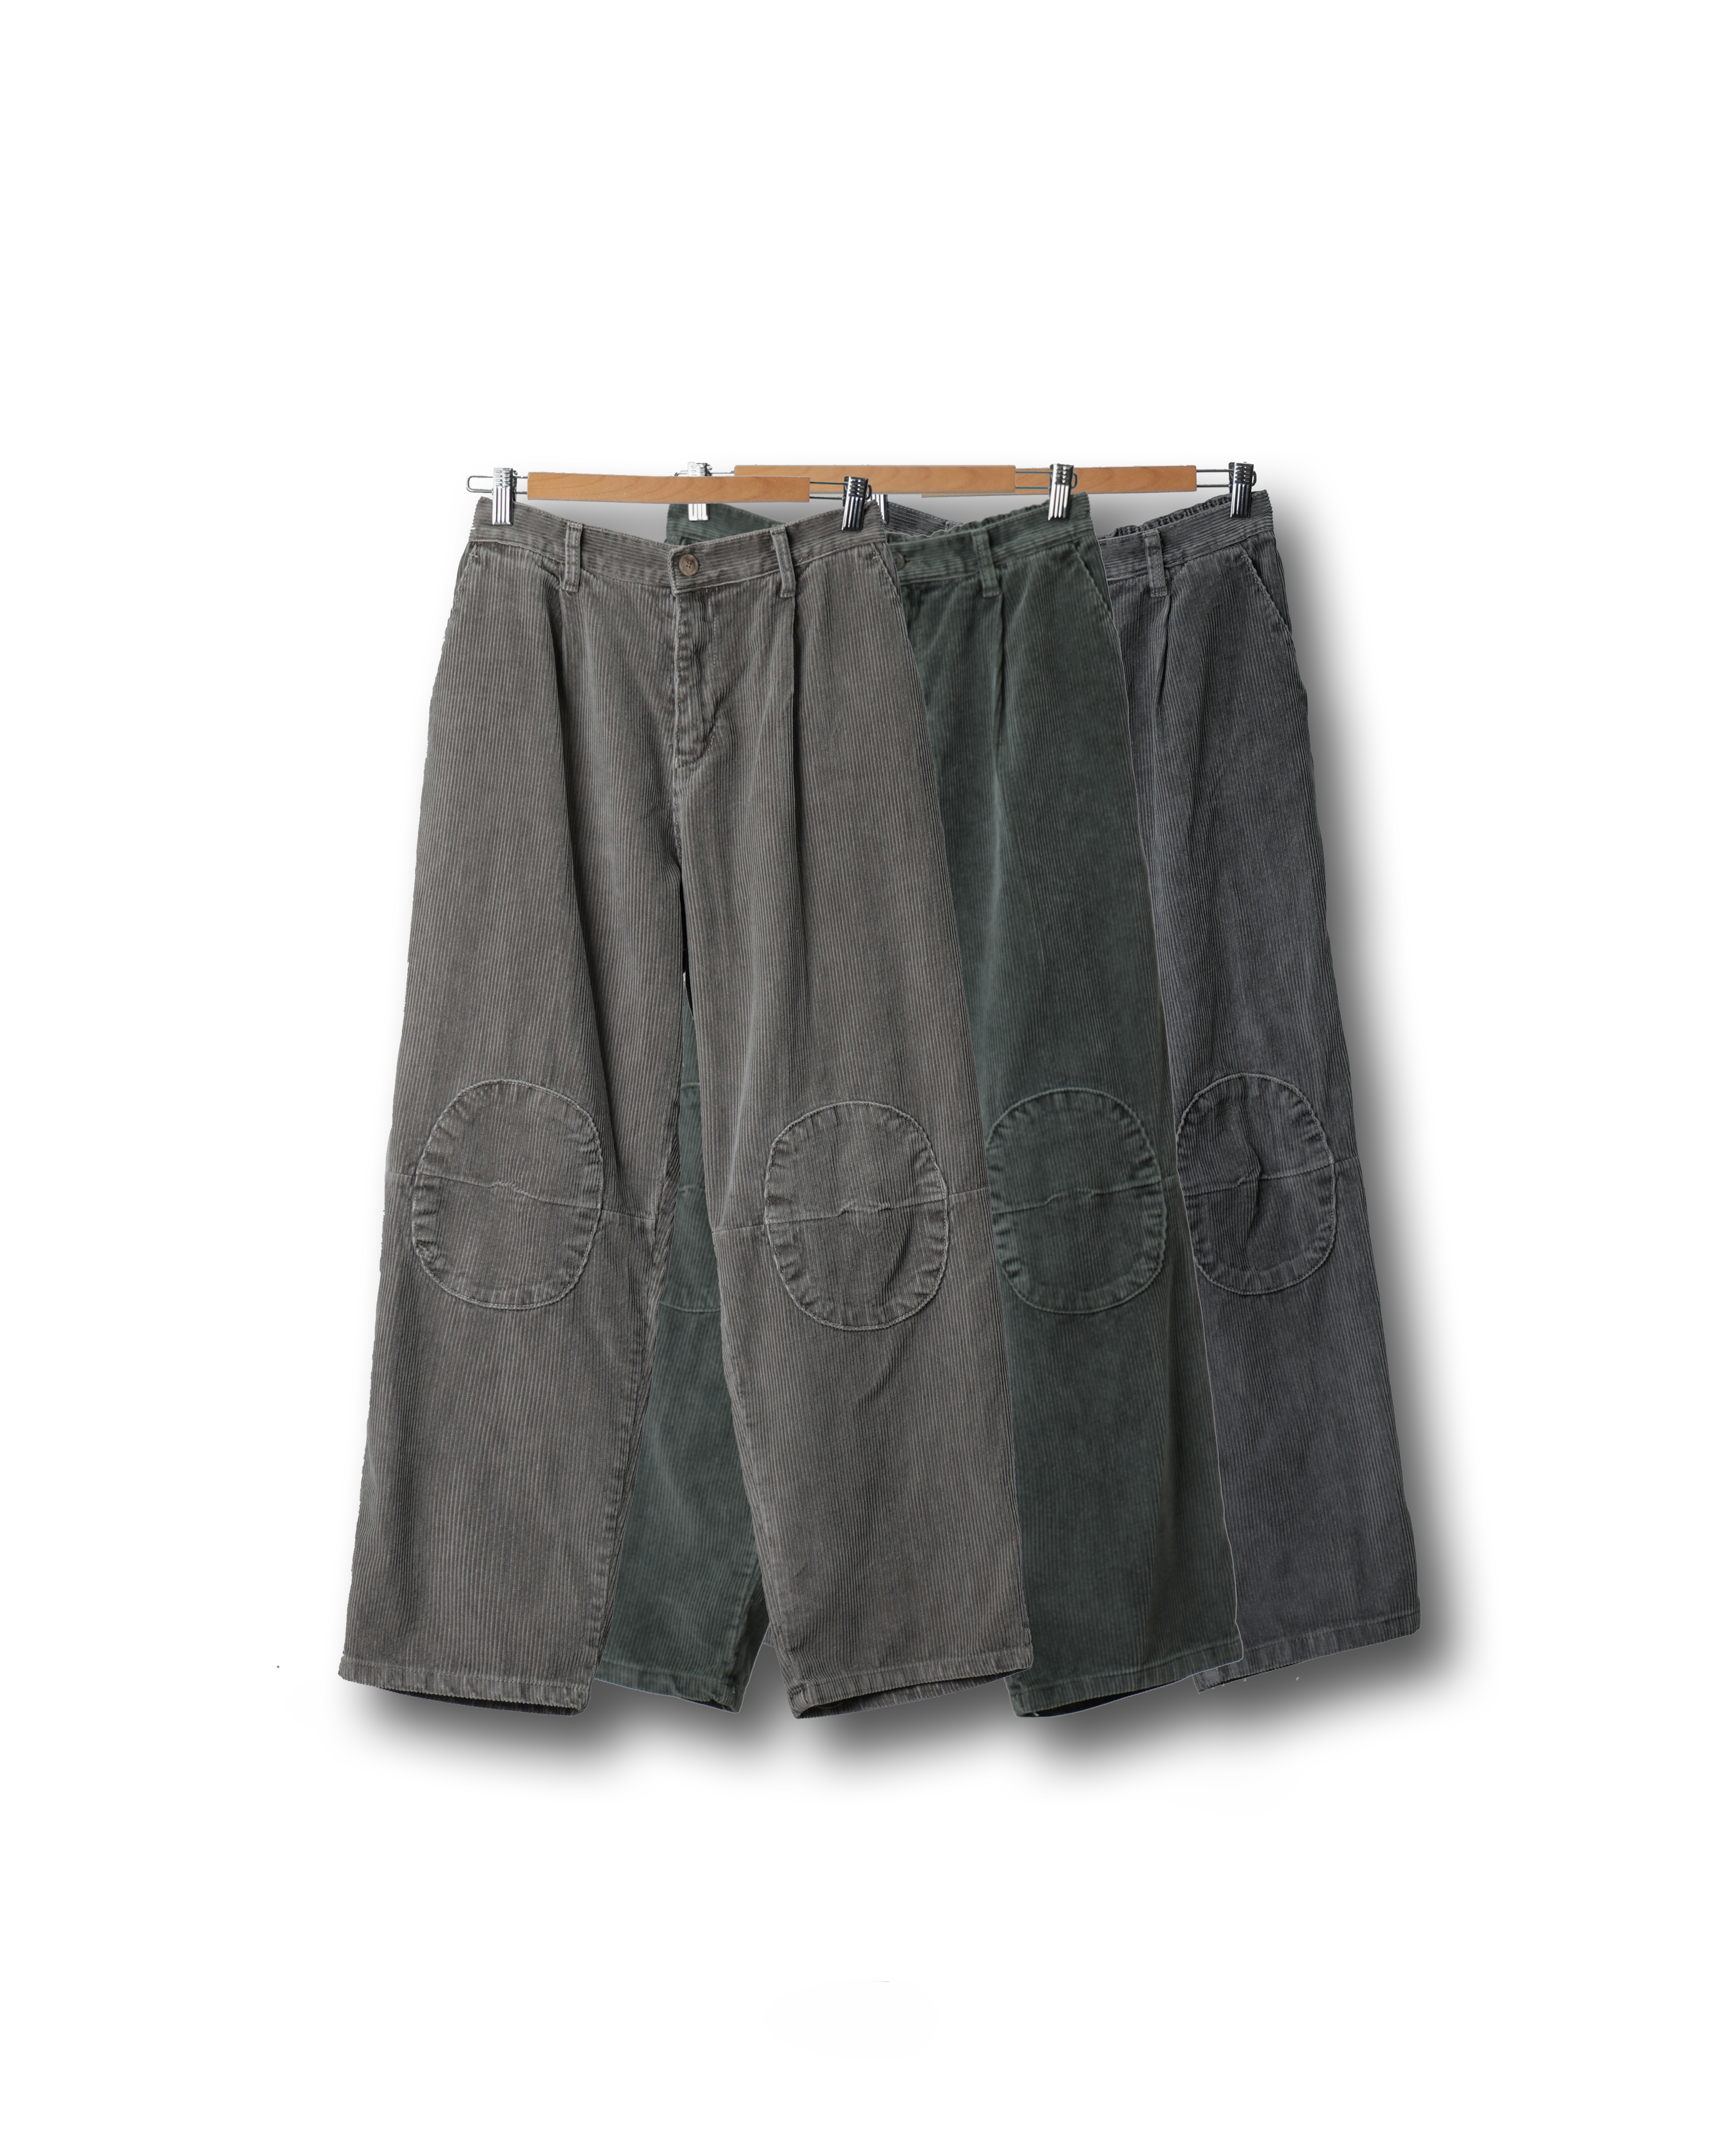 HIFIE PATCHED Corduroy Loose Washed Pants (Charcoal/Olive/Brown Beige)